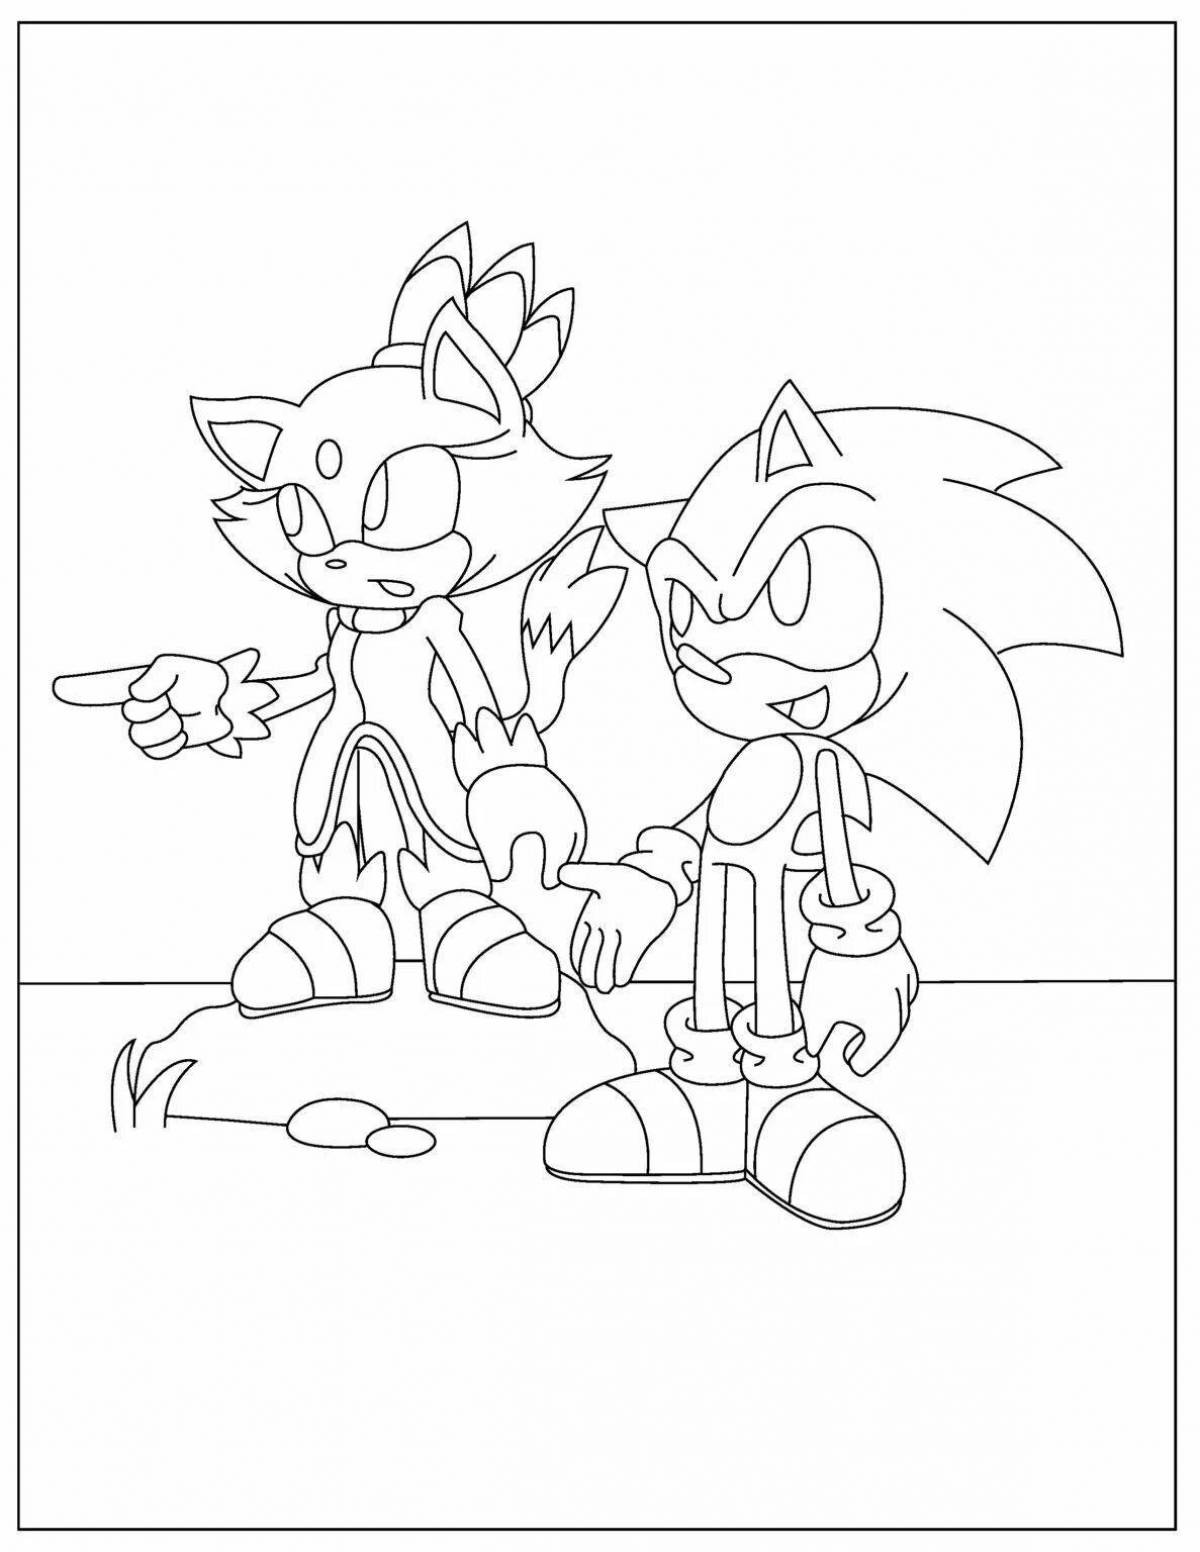 Delightful knuckles and rouge coloring book